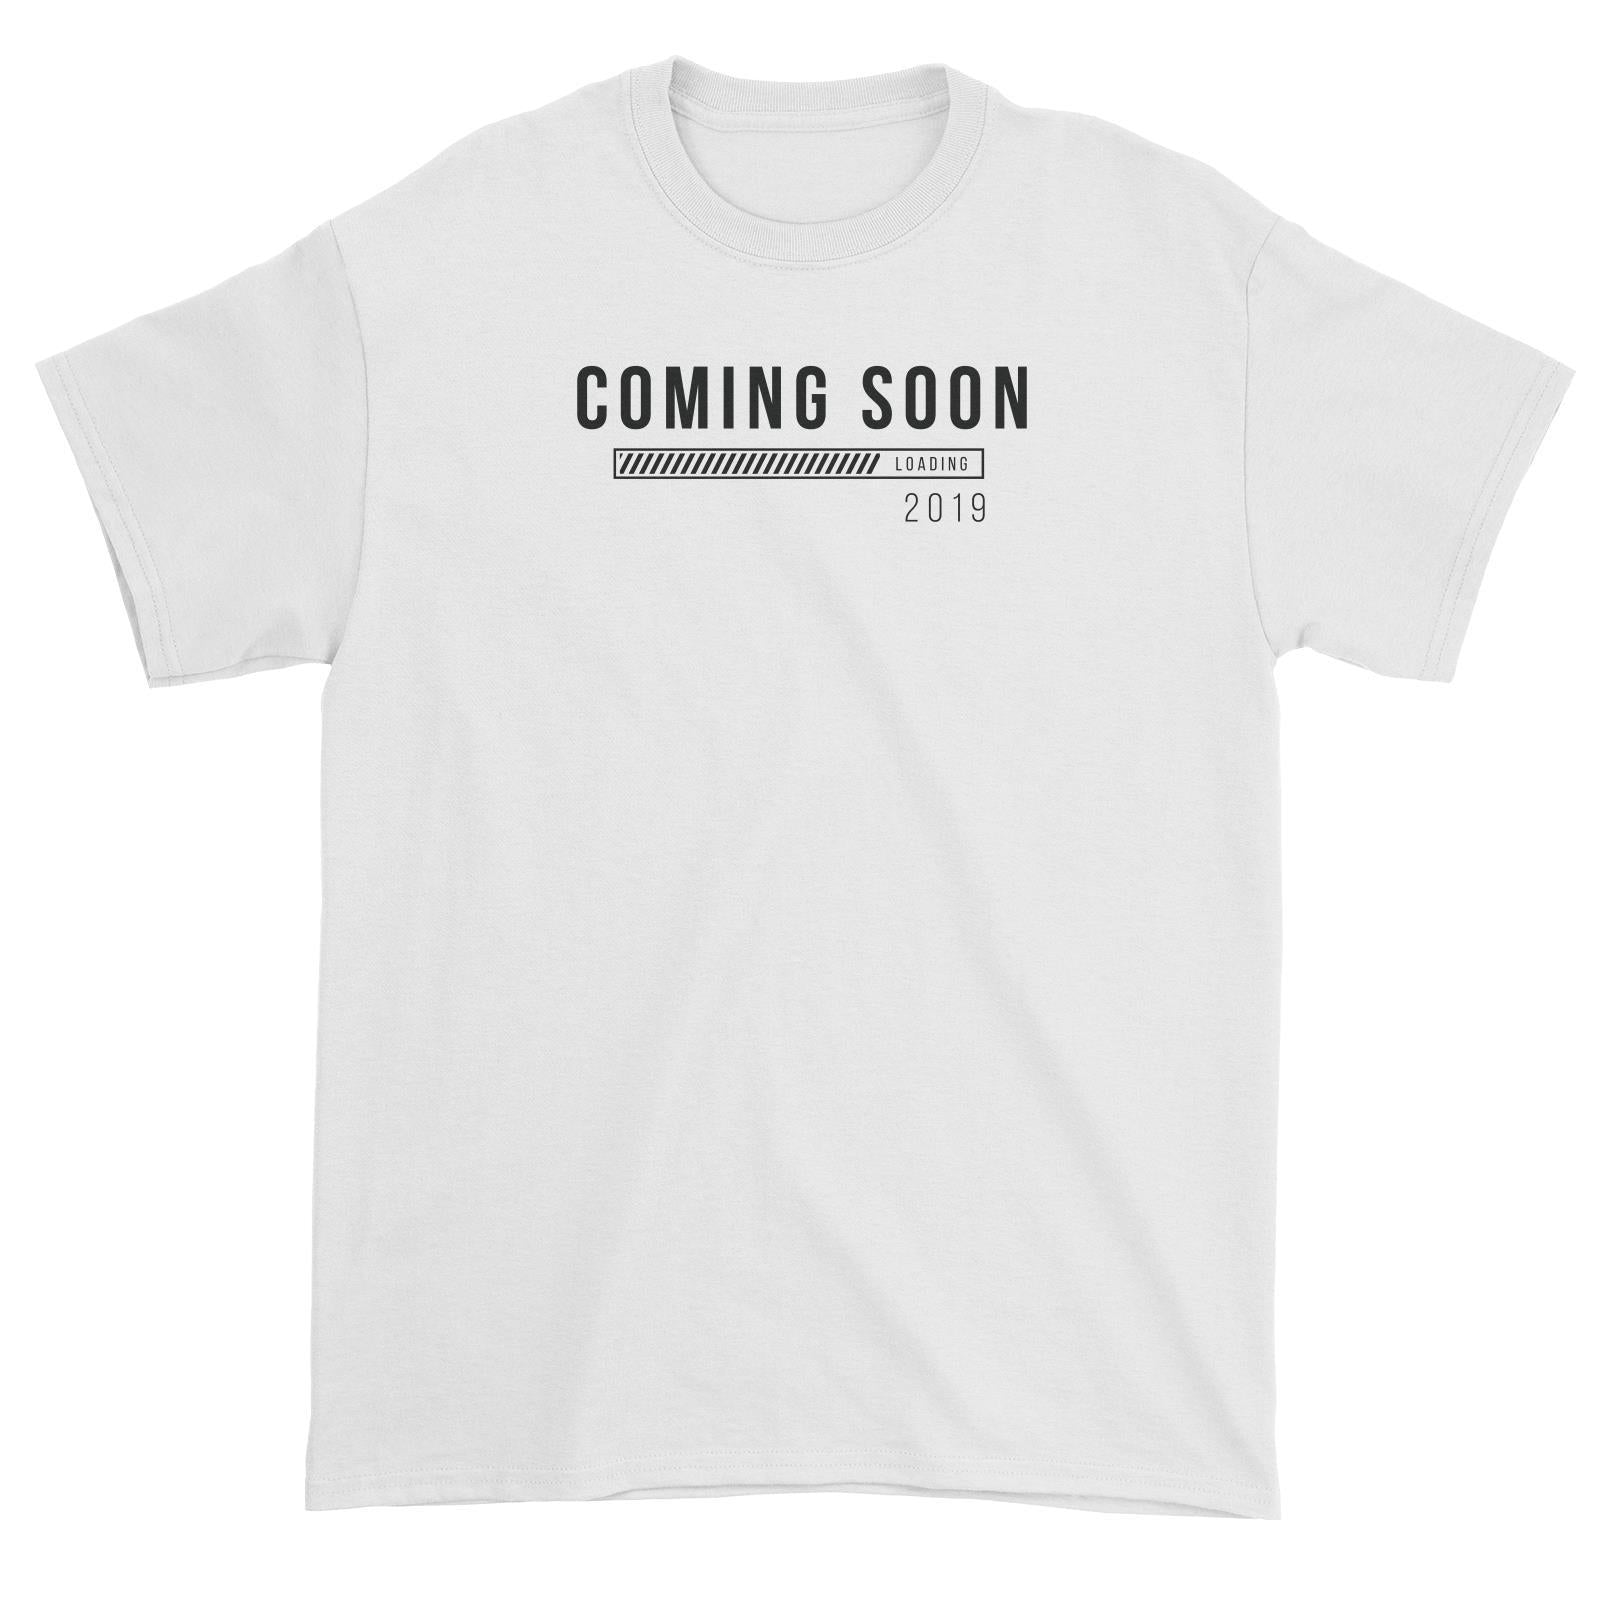 Coming Soon Family Coming Soon Loading Add Date Unisex T-Shirt